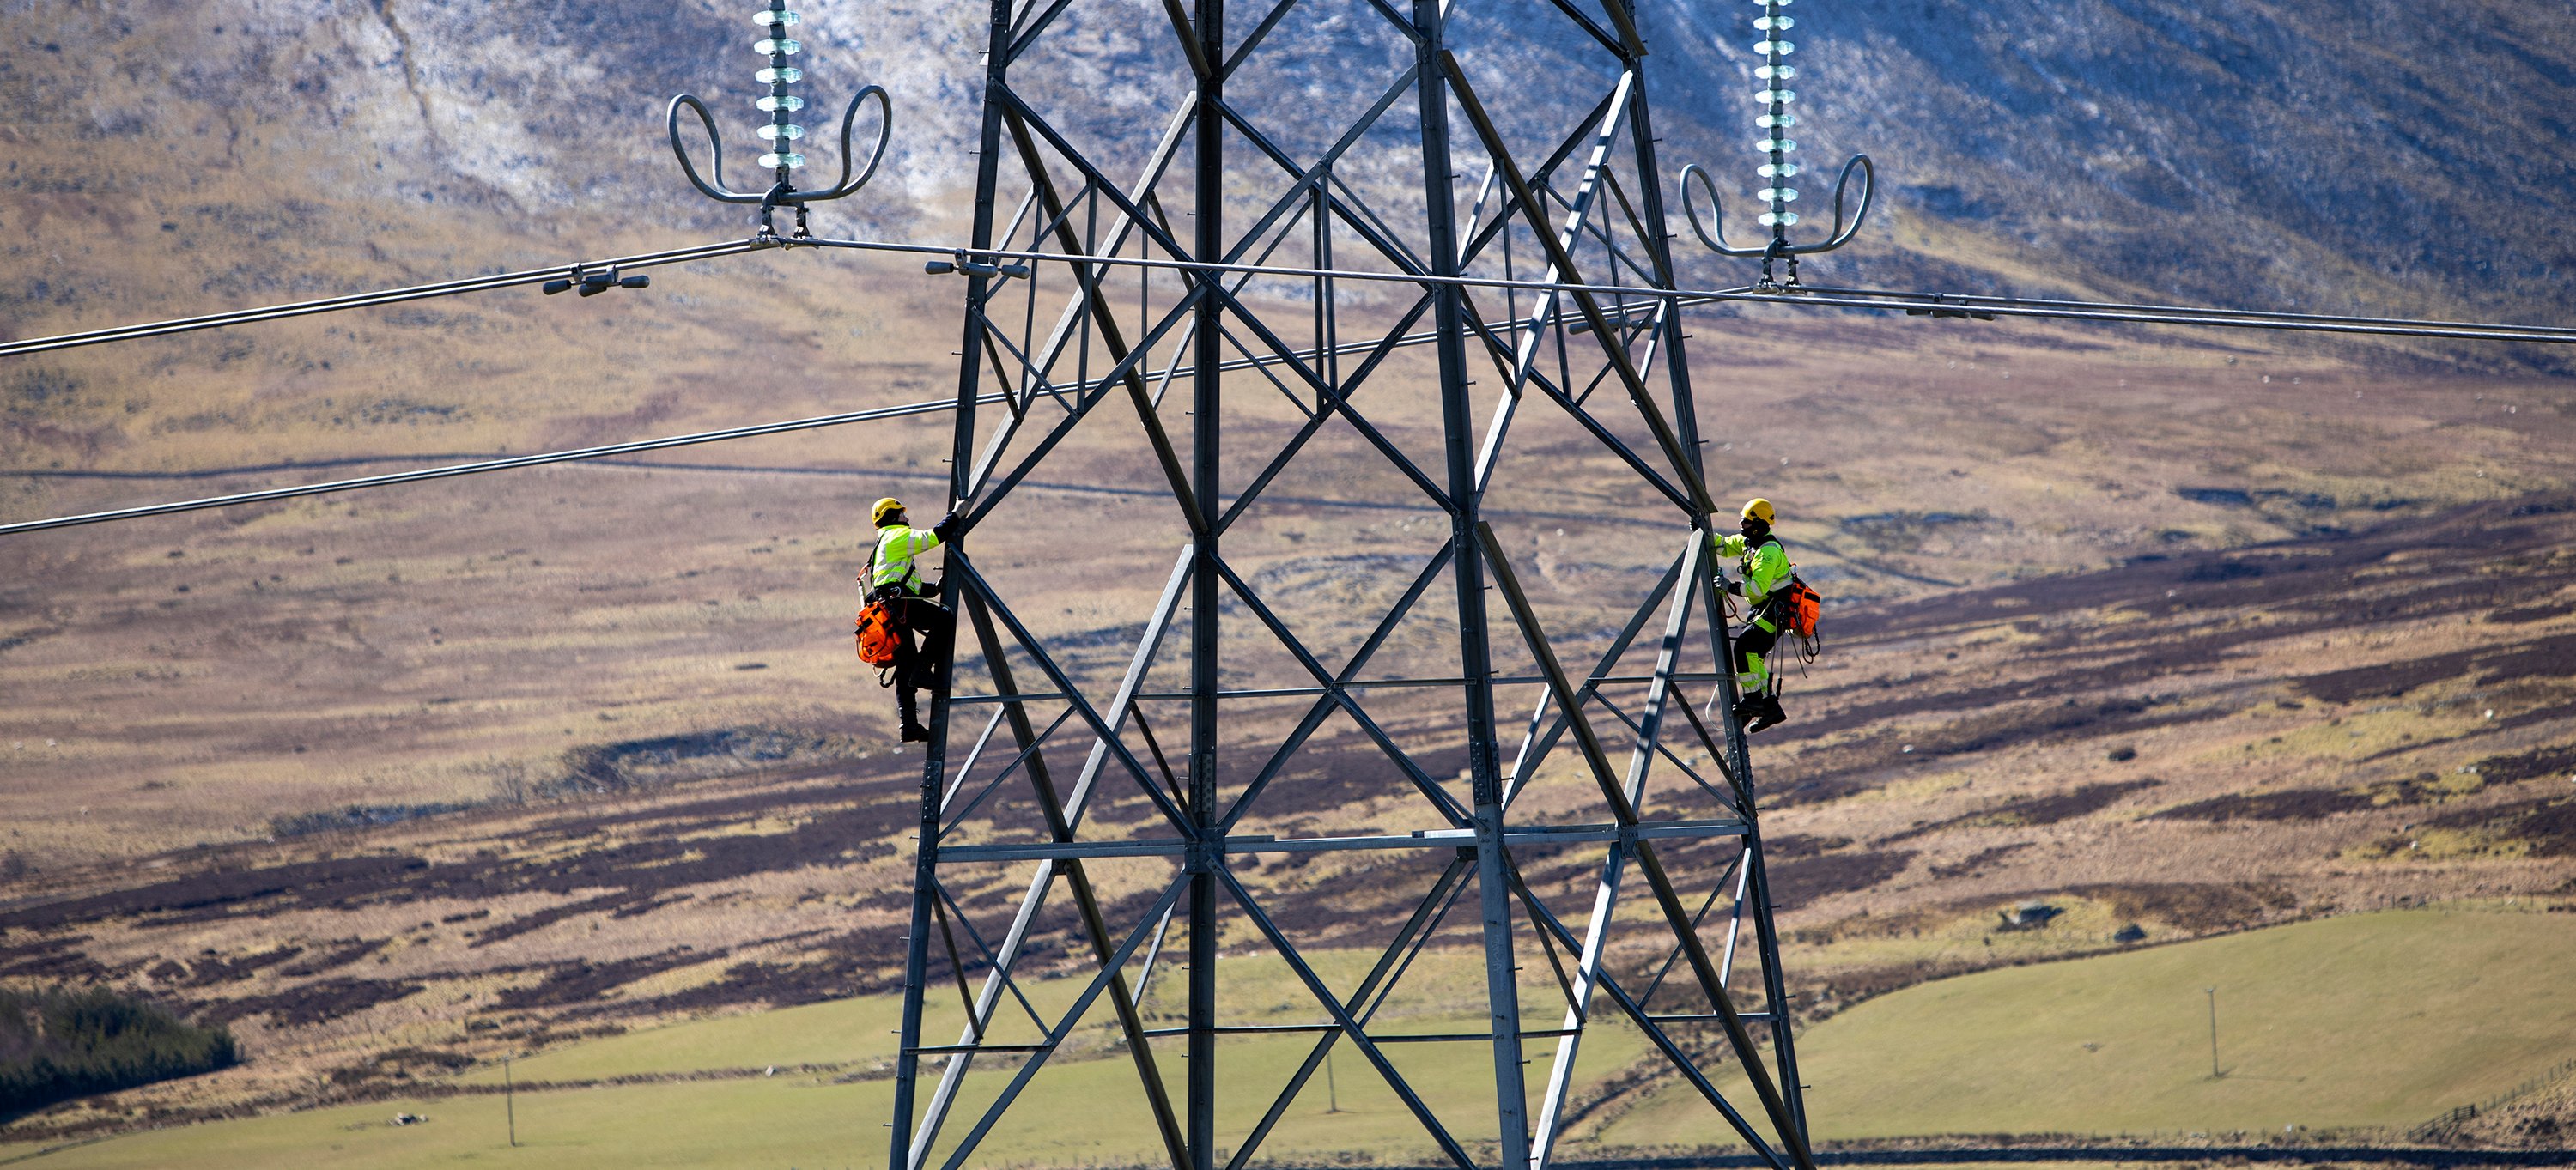 Two engineers climb a transmission tower